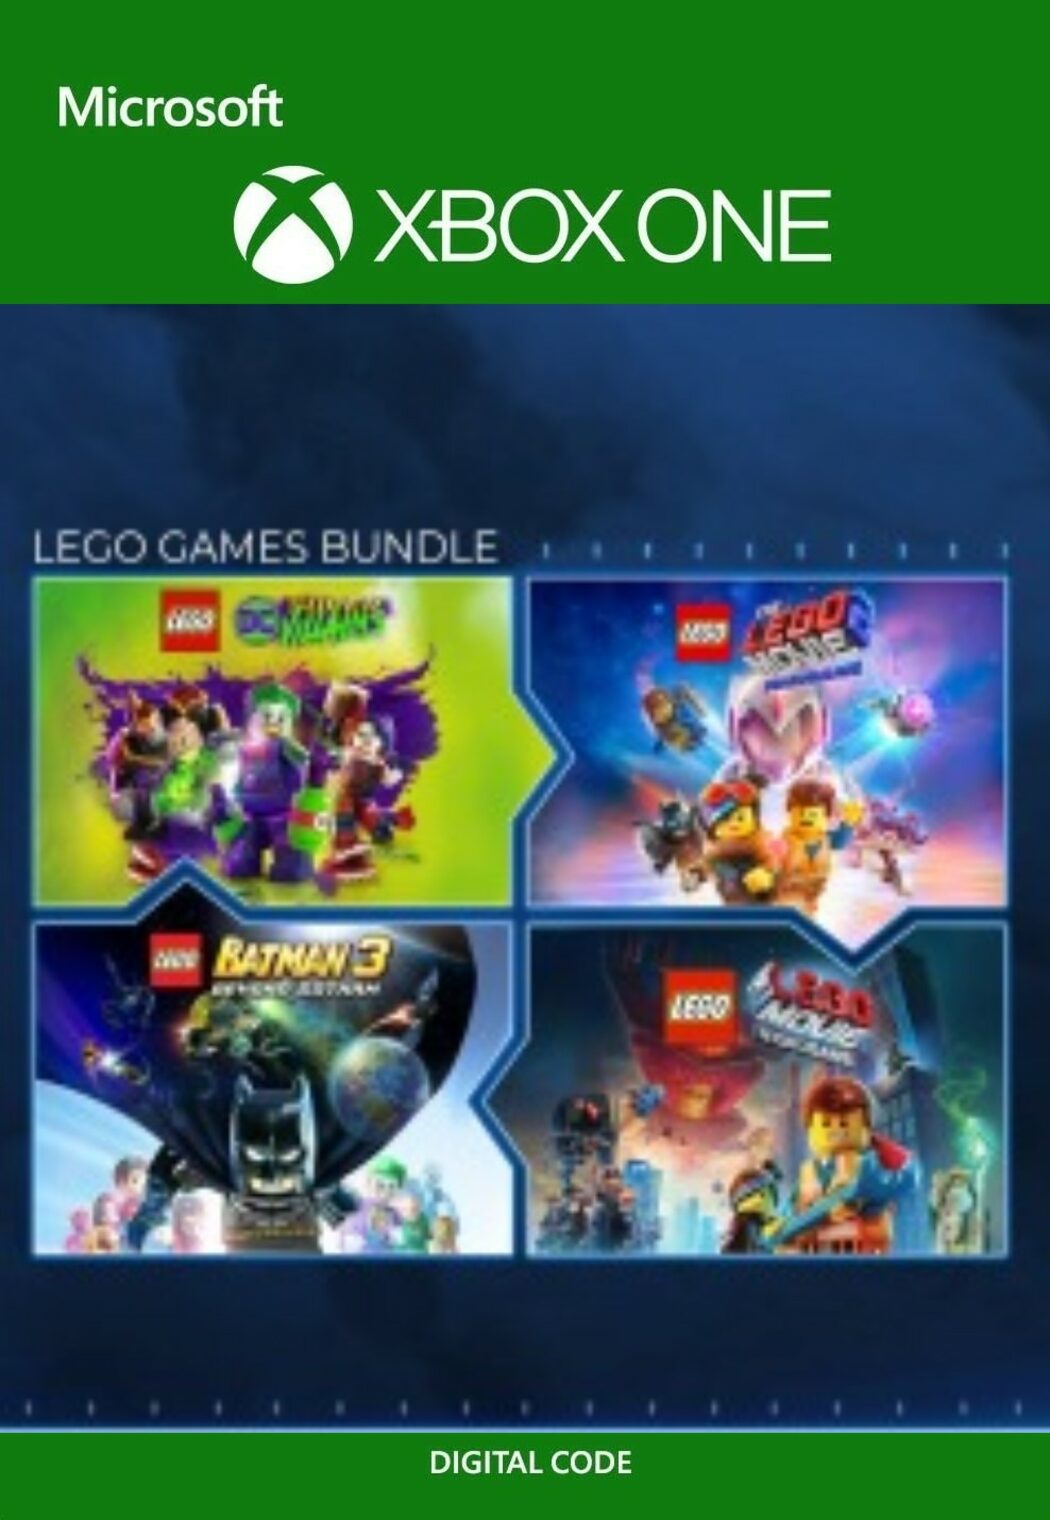 cheapest place to buy xbox games